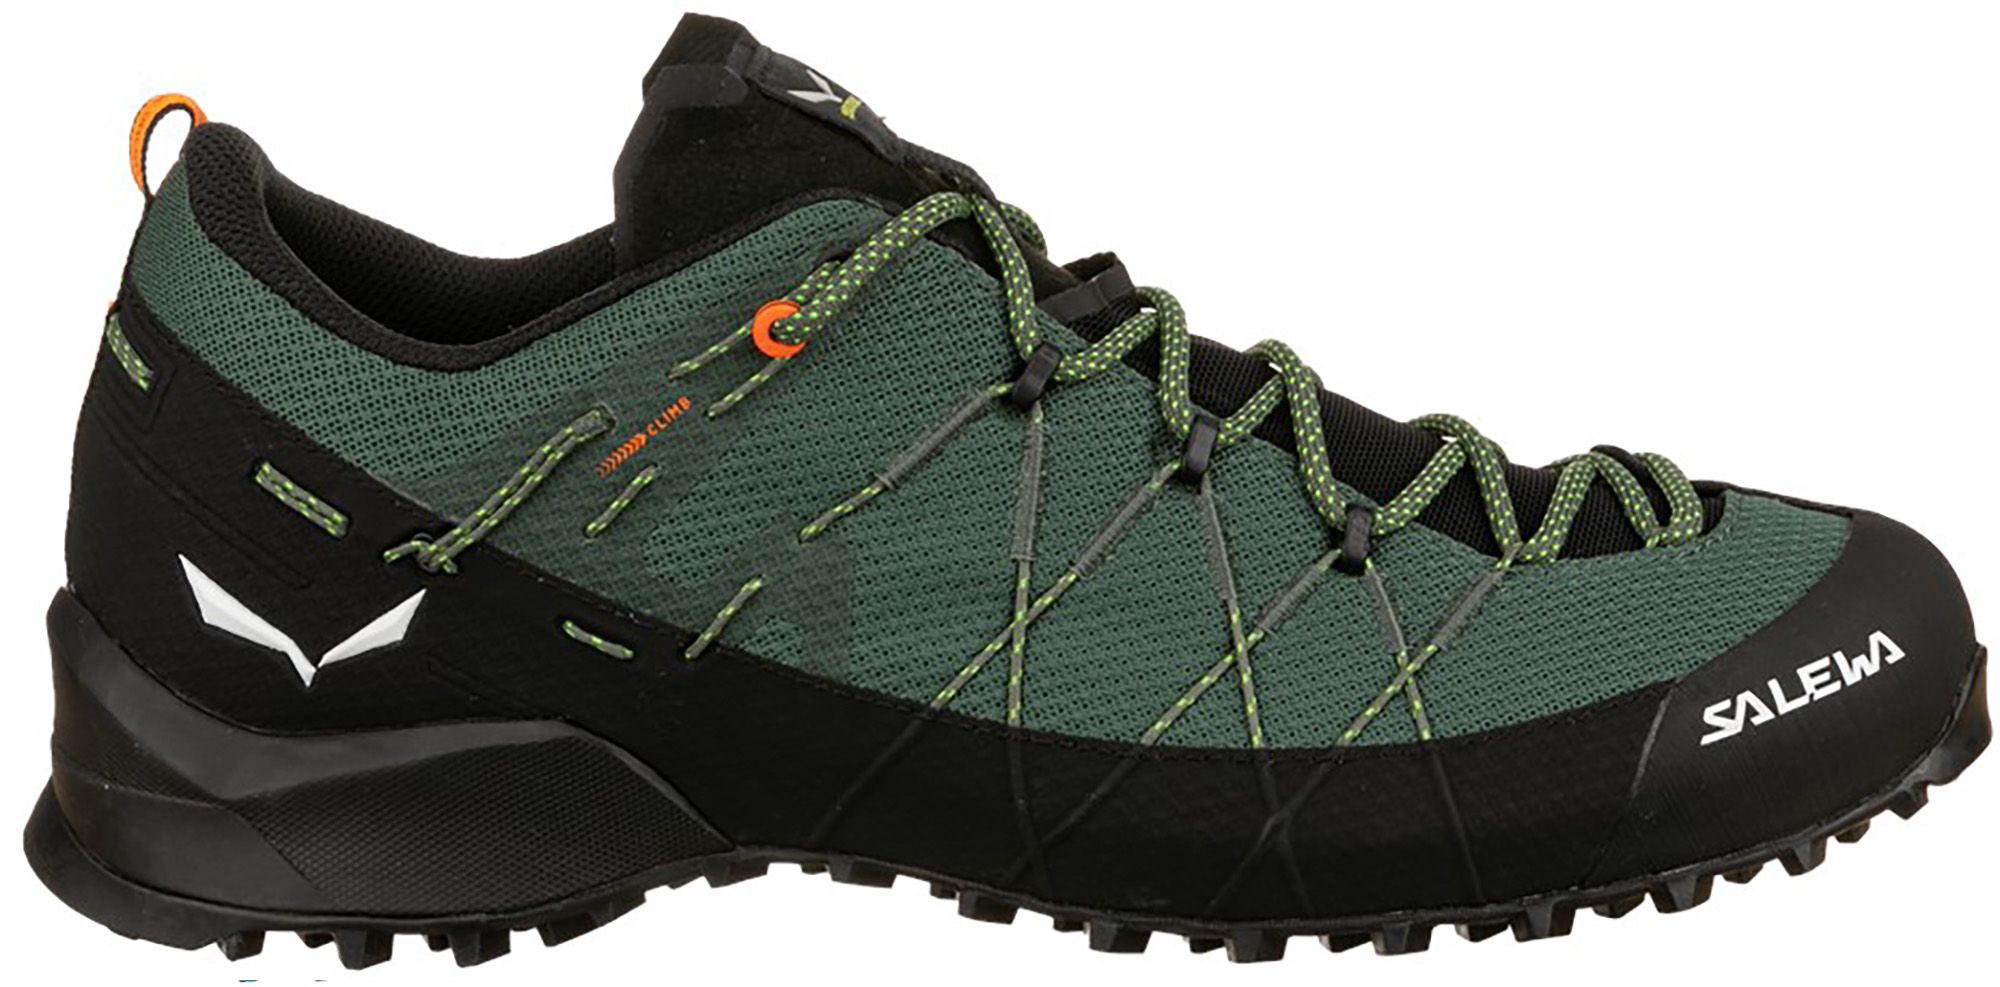 Photos - Trekking Shoes Salewa Men's Wildfire 2 Approach Shoes, Size 10.5, Black/Green 22IYPMMWLDF 